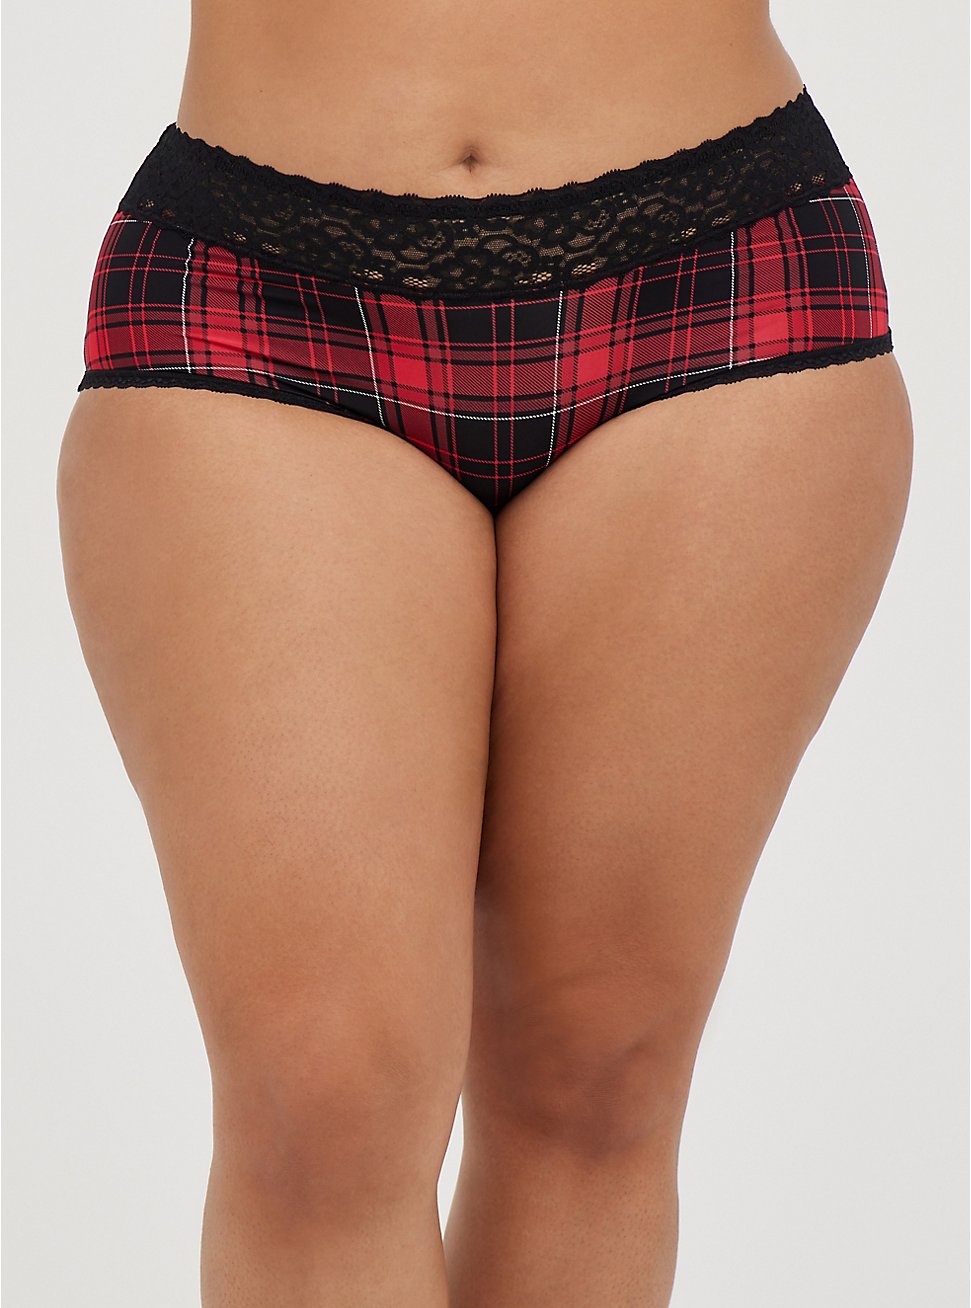 Wide Lace Trim Cheeky Panty - Microfiber Plaid Red, NY PLAID, hi-res